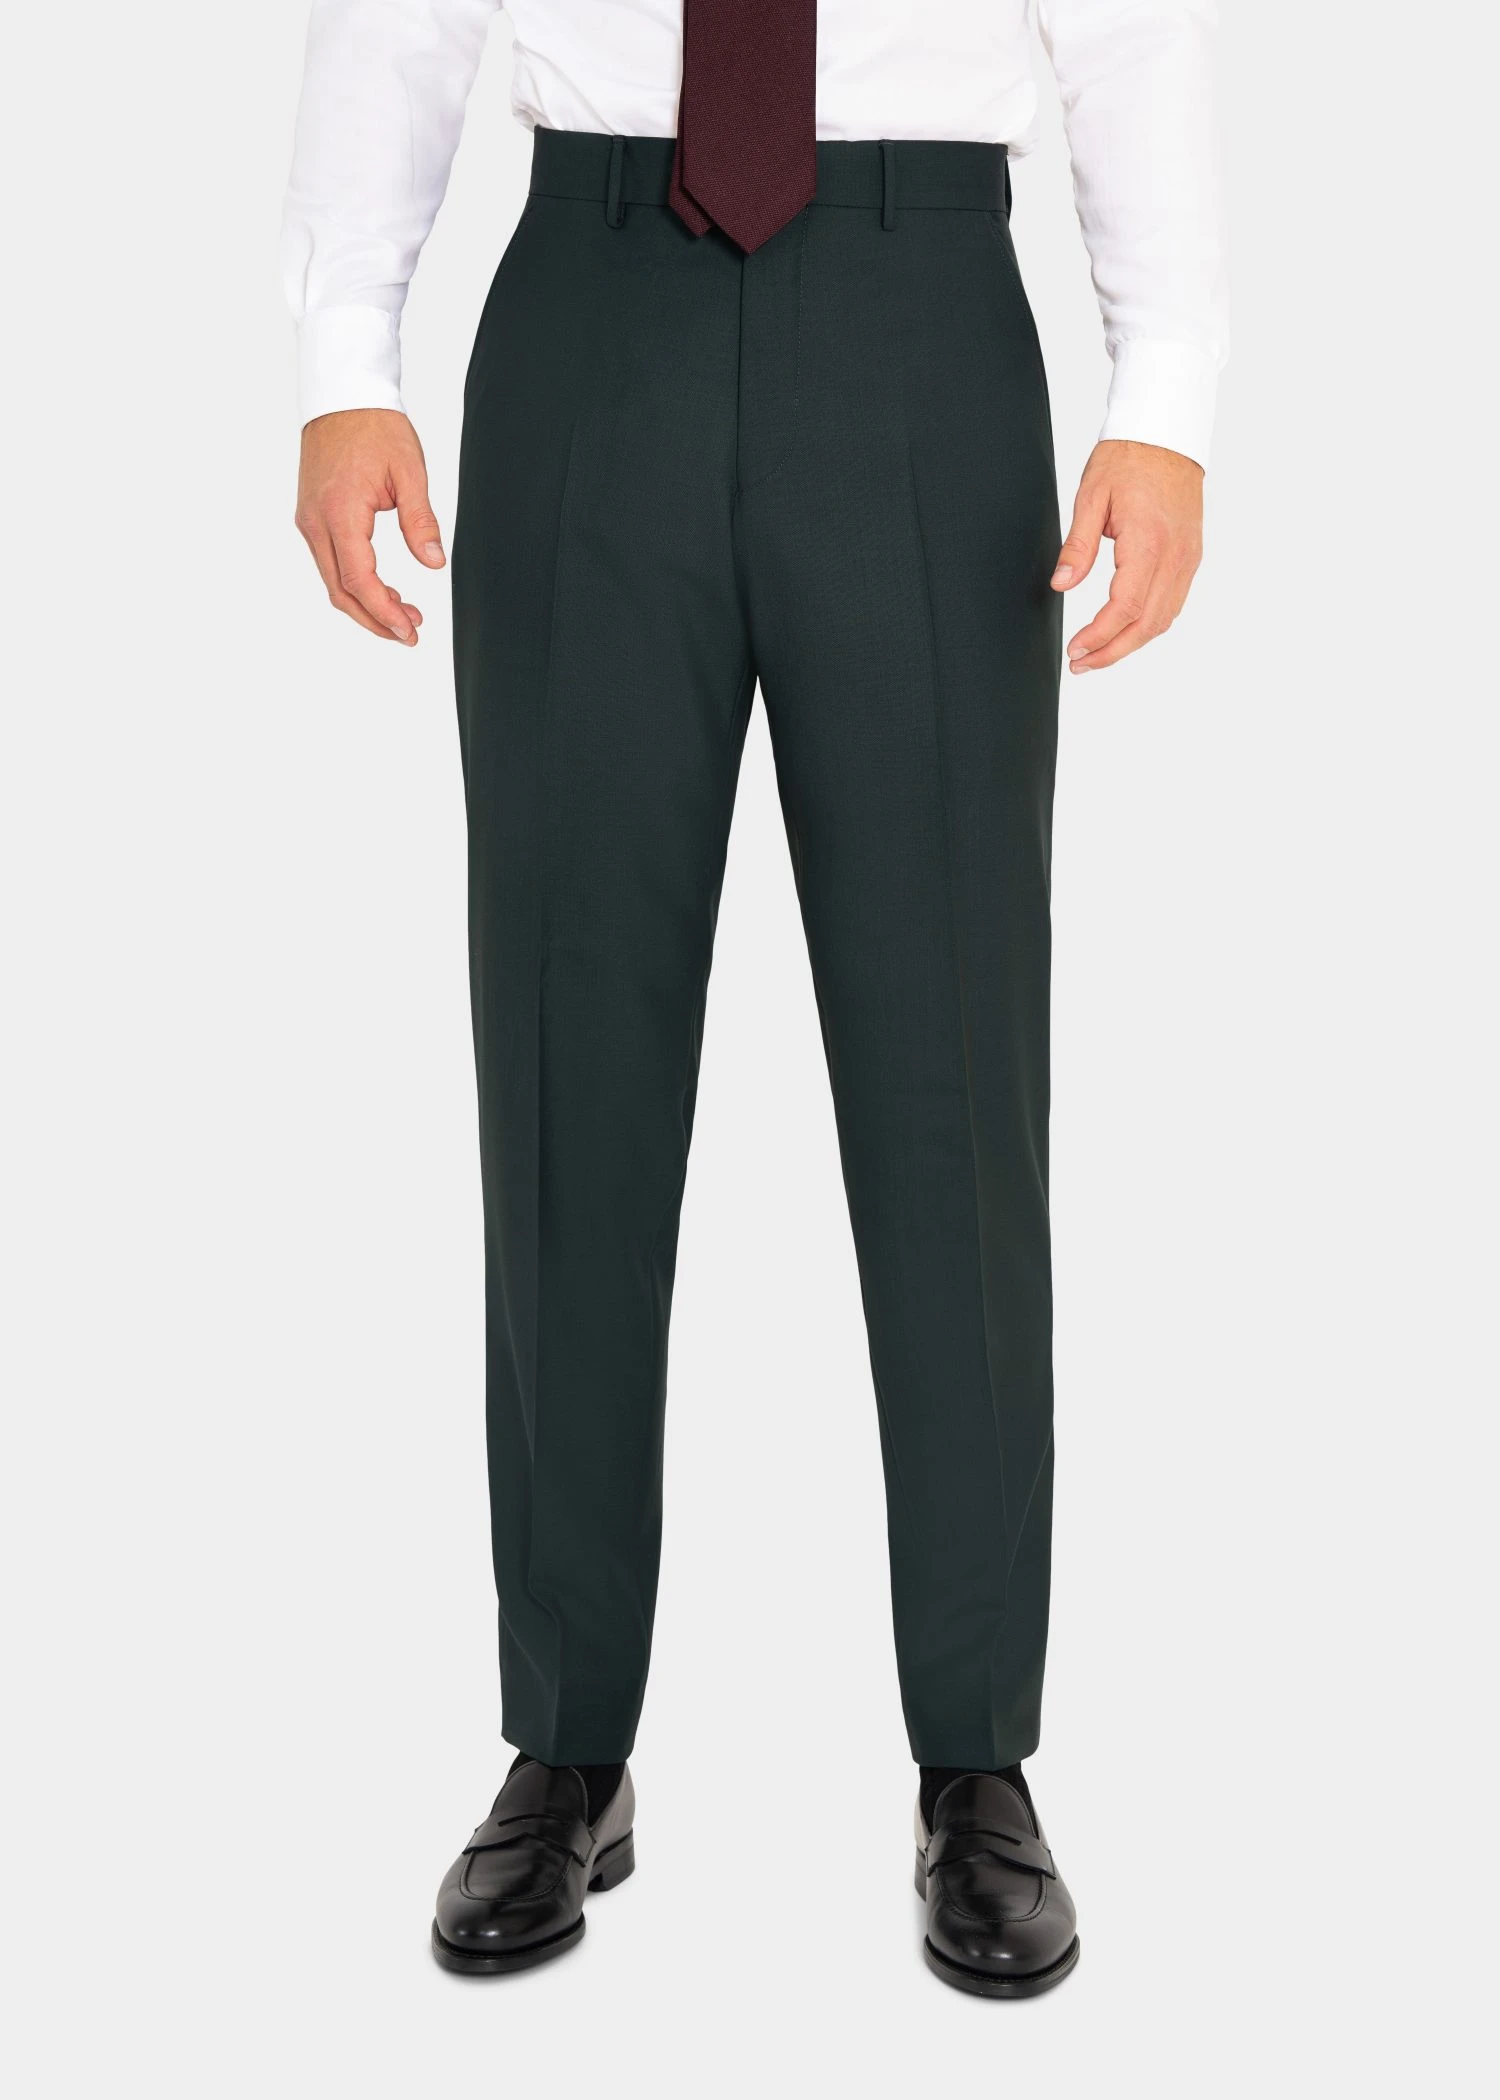 dark green suit trousers in twistair fabric